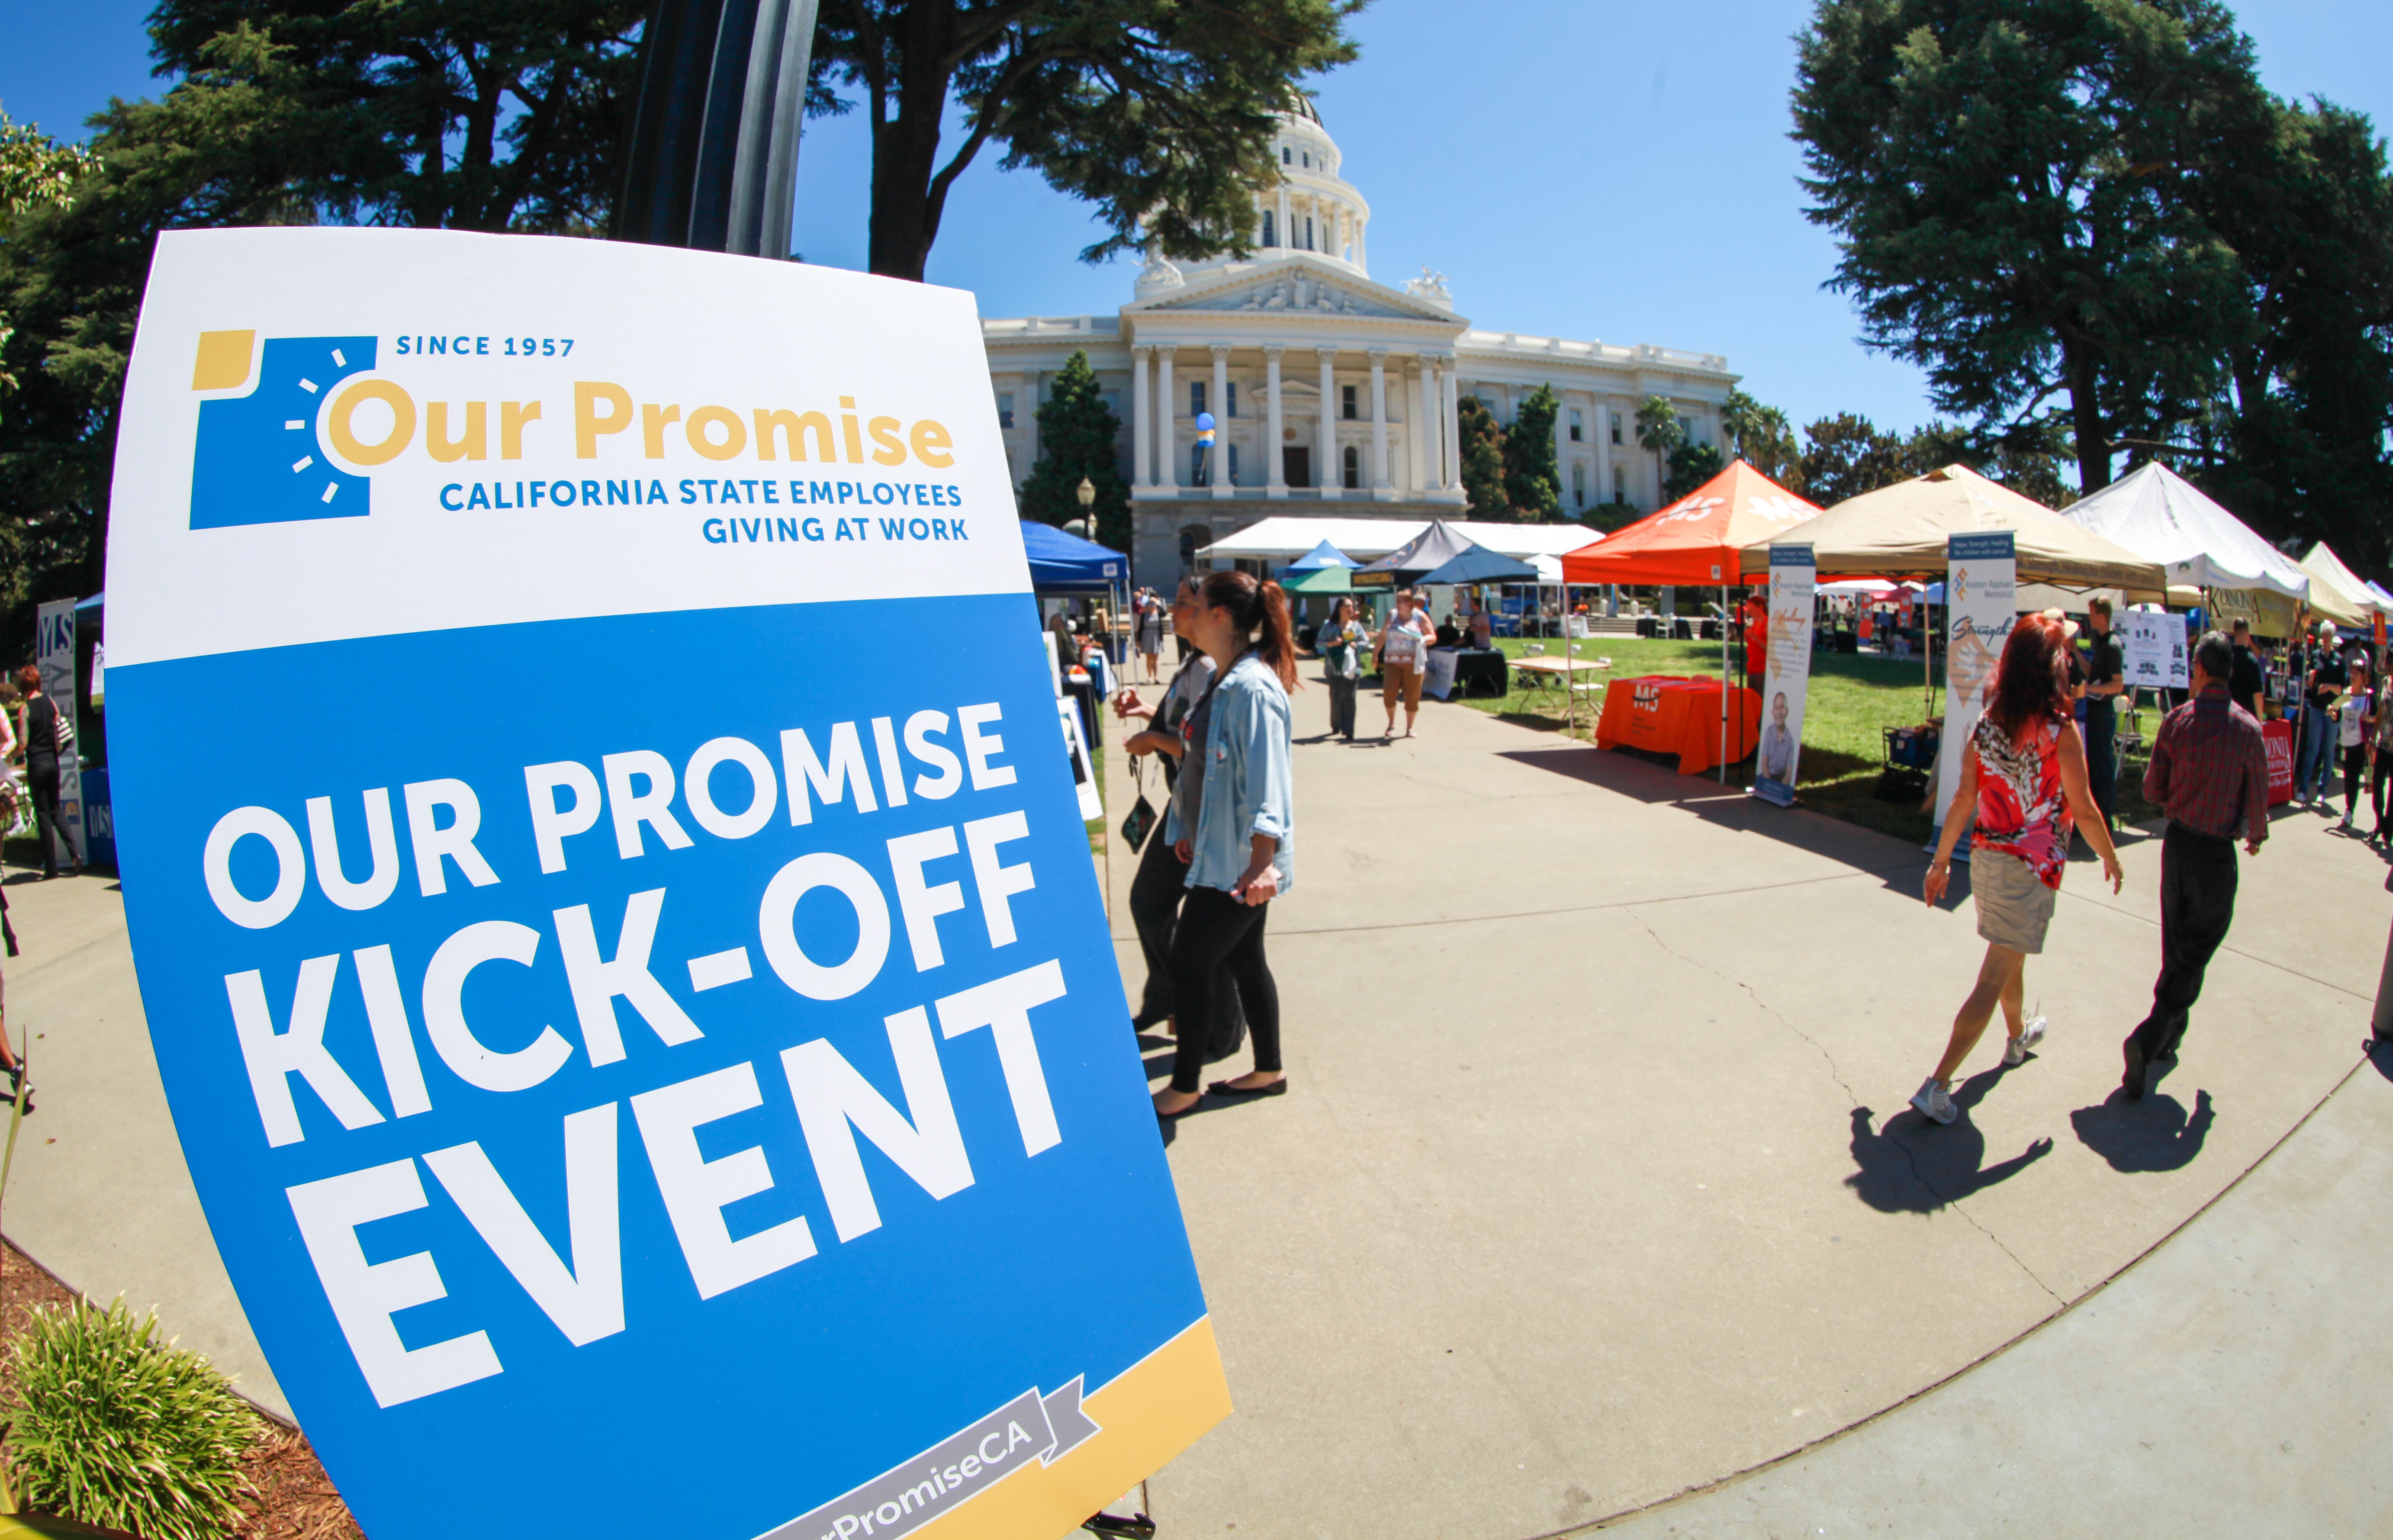 Sign says Our Promise Kick-Off Event while people walk around at the state capitol.